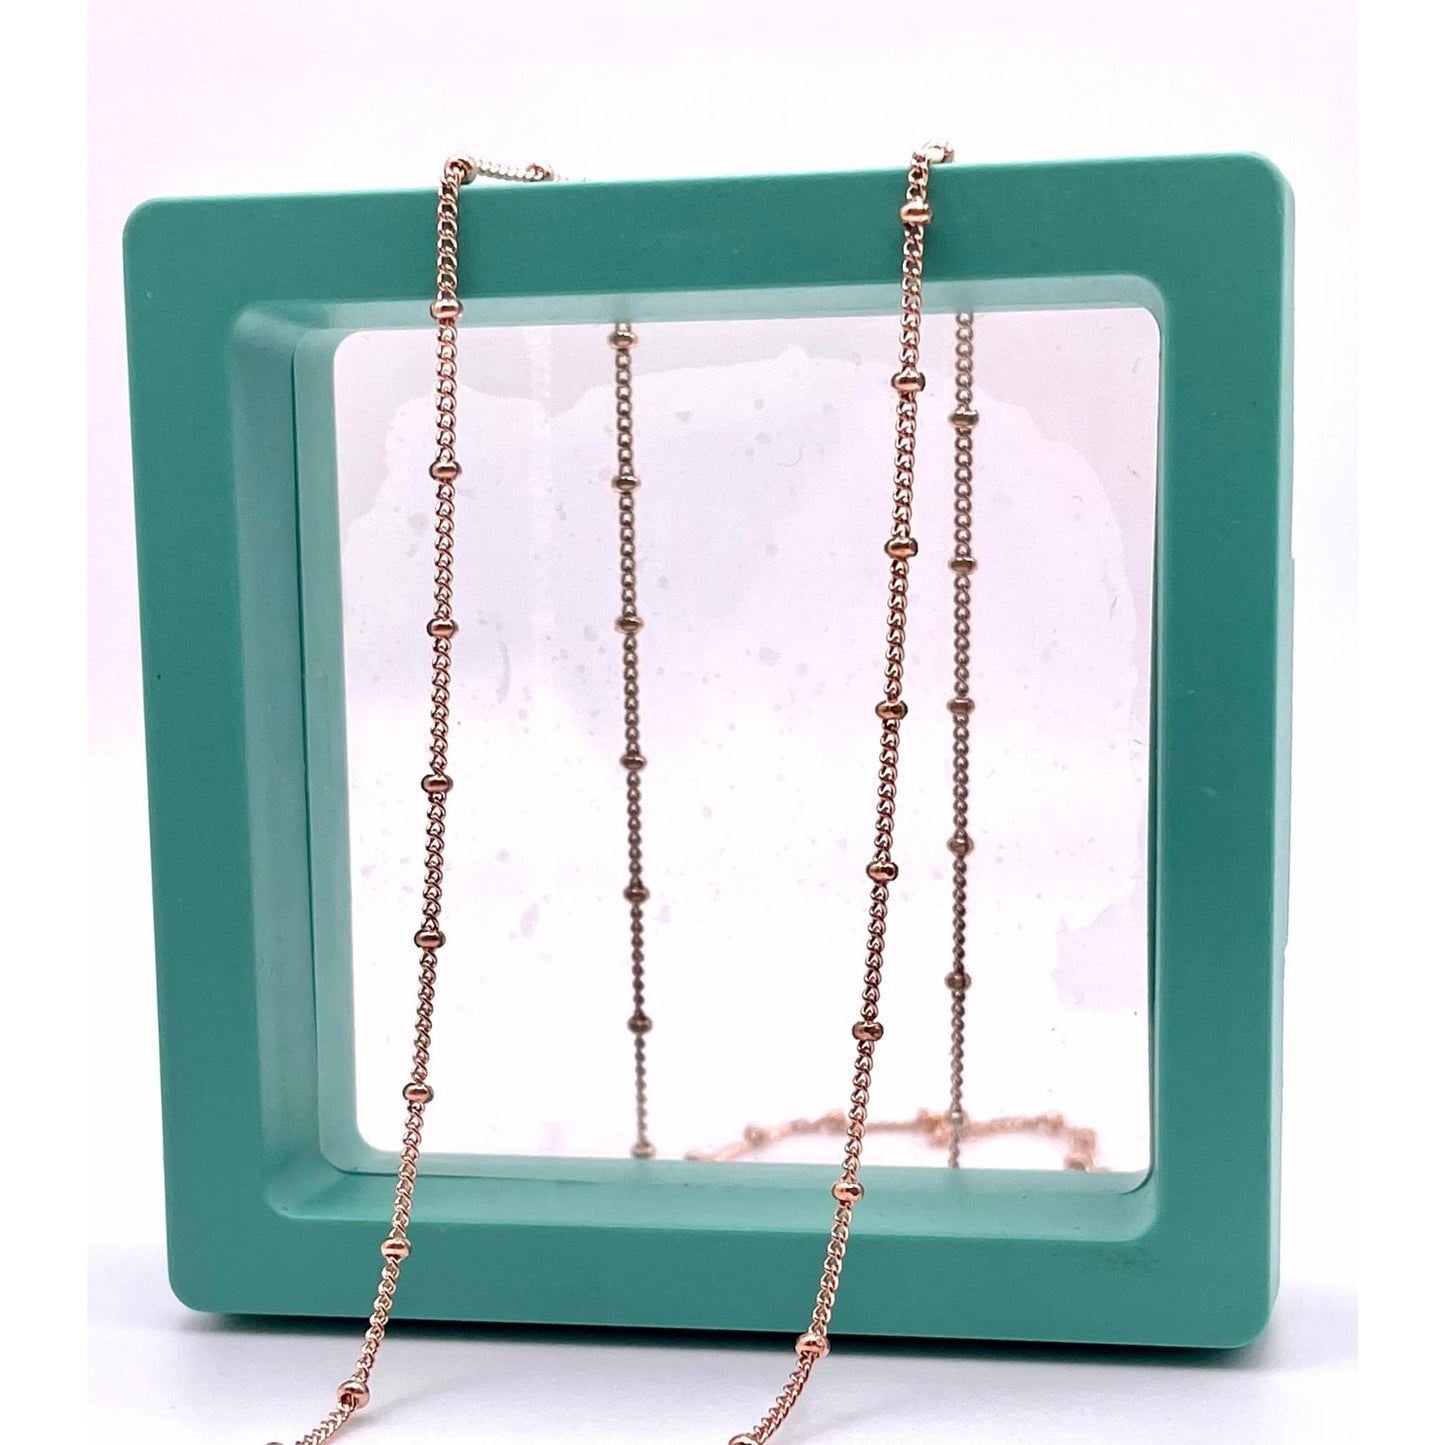 14k rose gold filled satellite chain for permanent jewelry in a green hallow box.